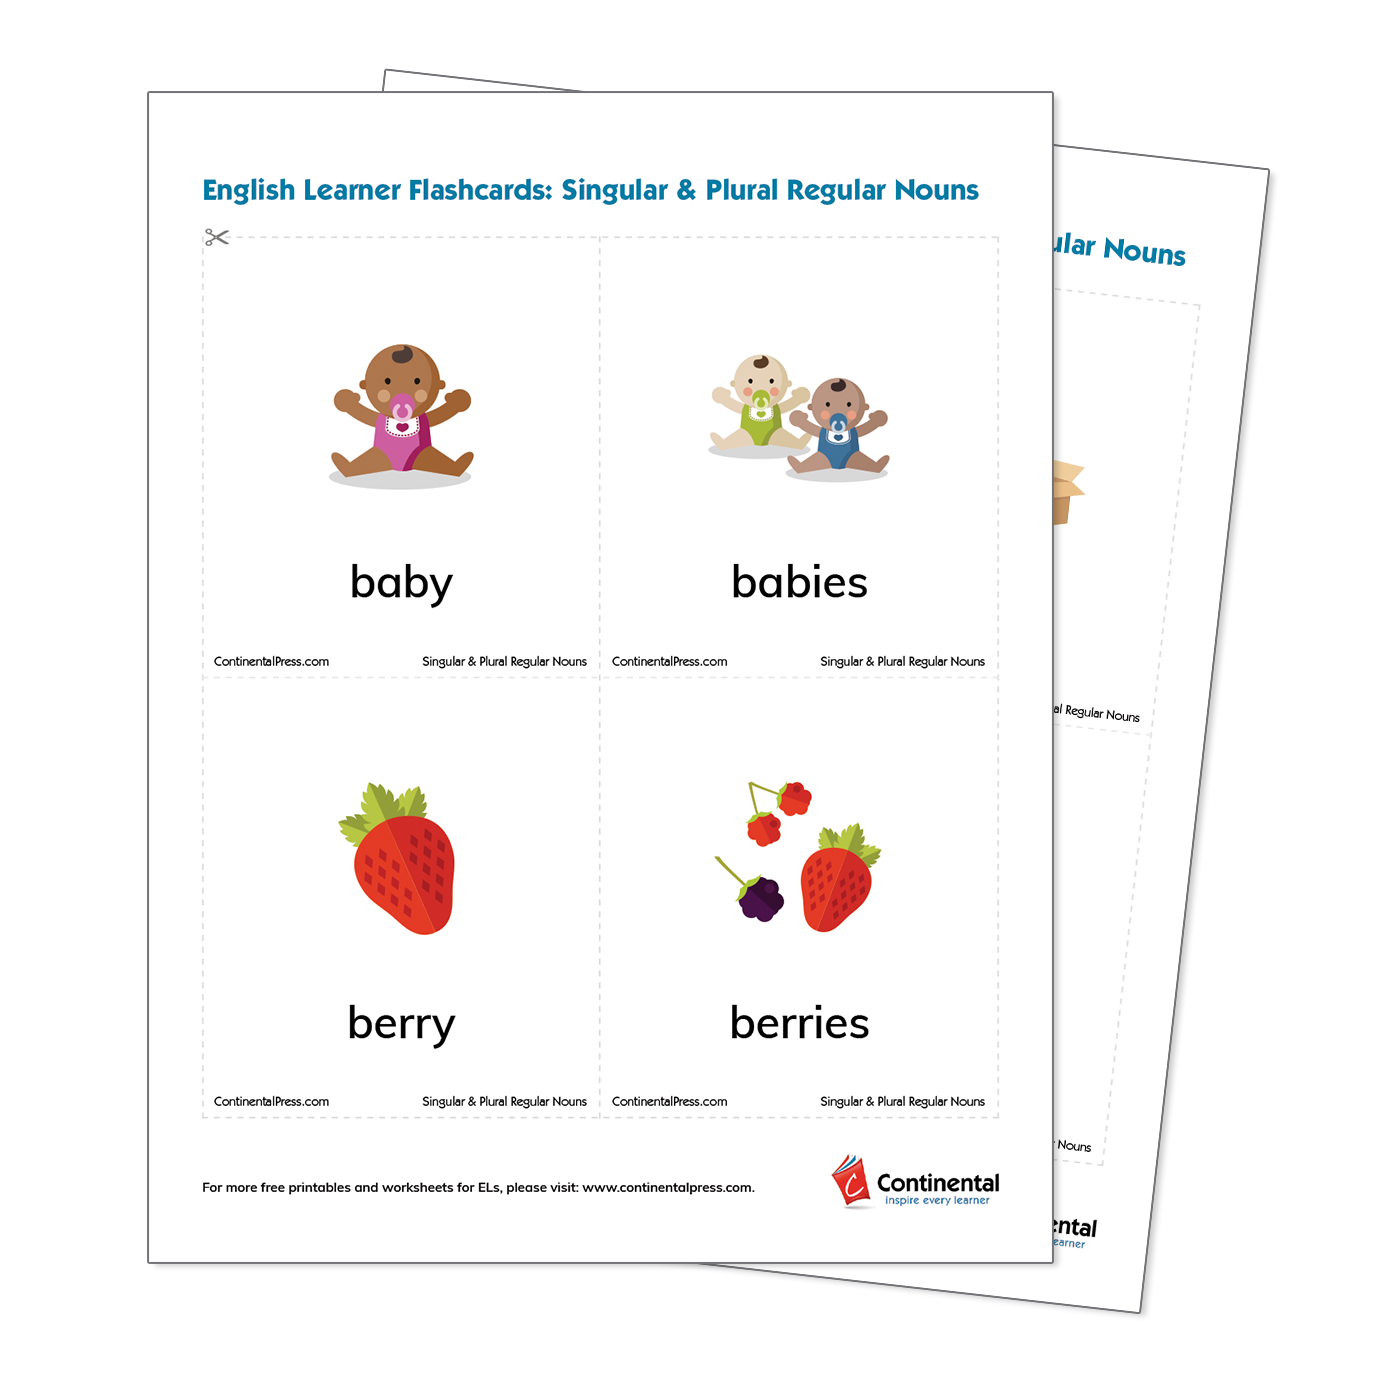 Free flash cards and resources for K-12 teachers